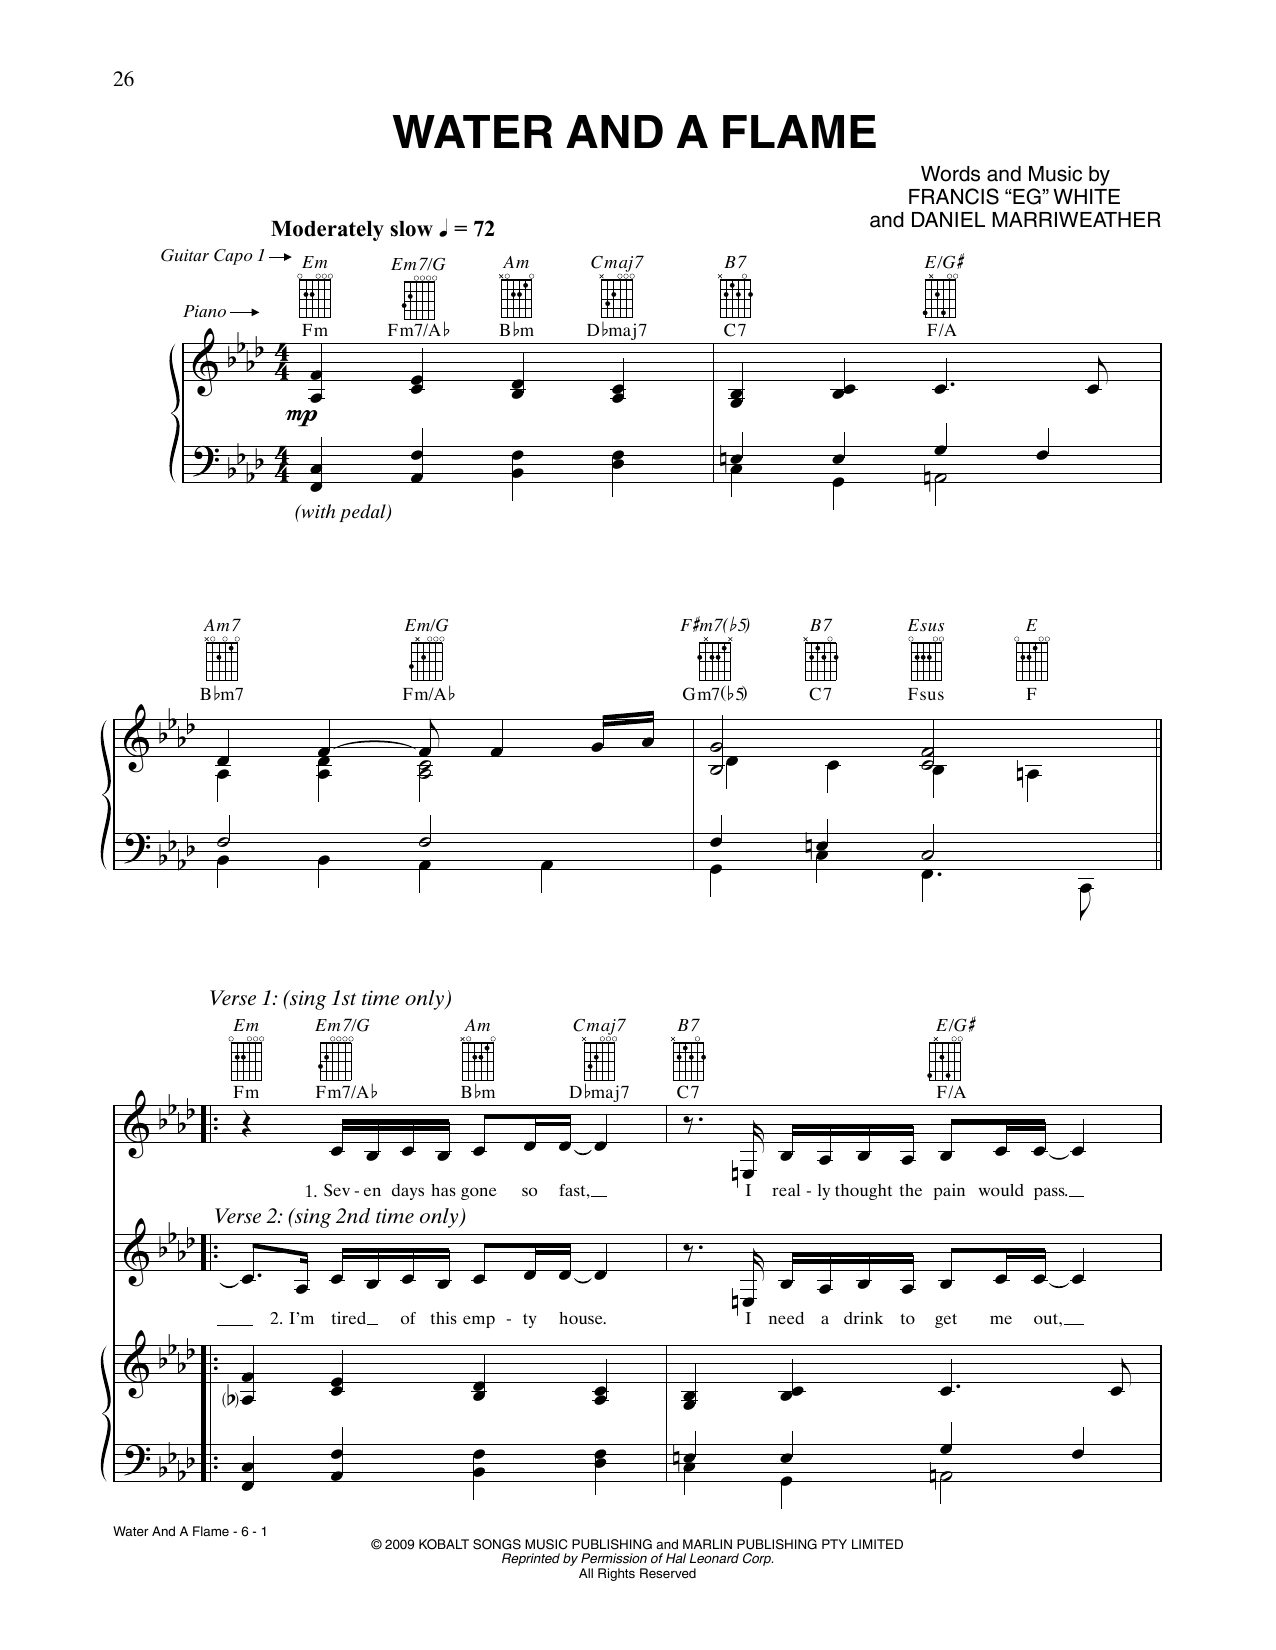 Download CÉLINE DION Water And A Flame Sheet Music